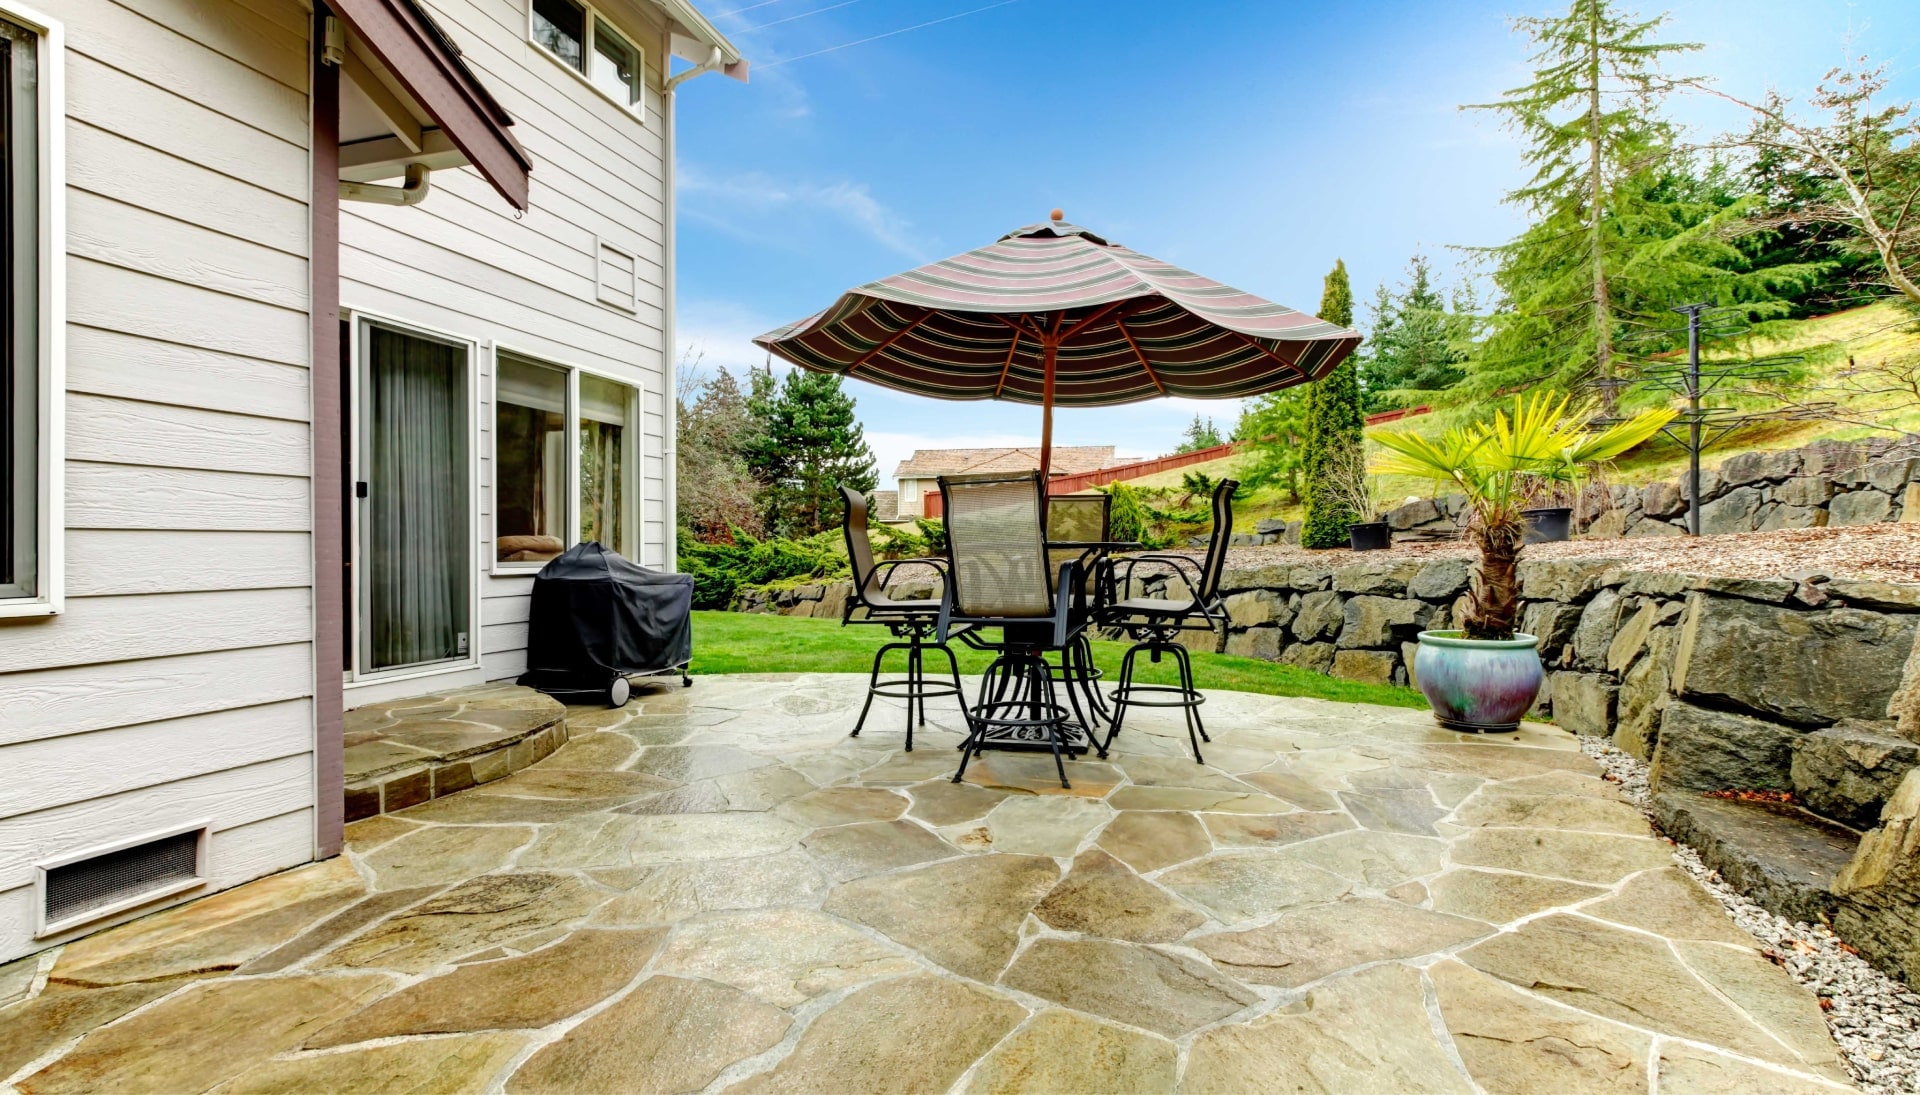 Beautifully Textured and Patterned Concrete Patios in Erie, Pennsylvania area!